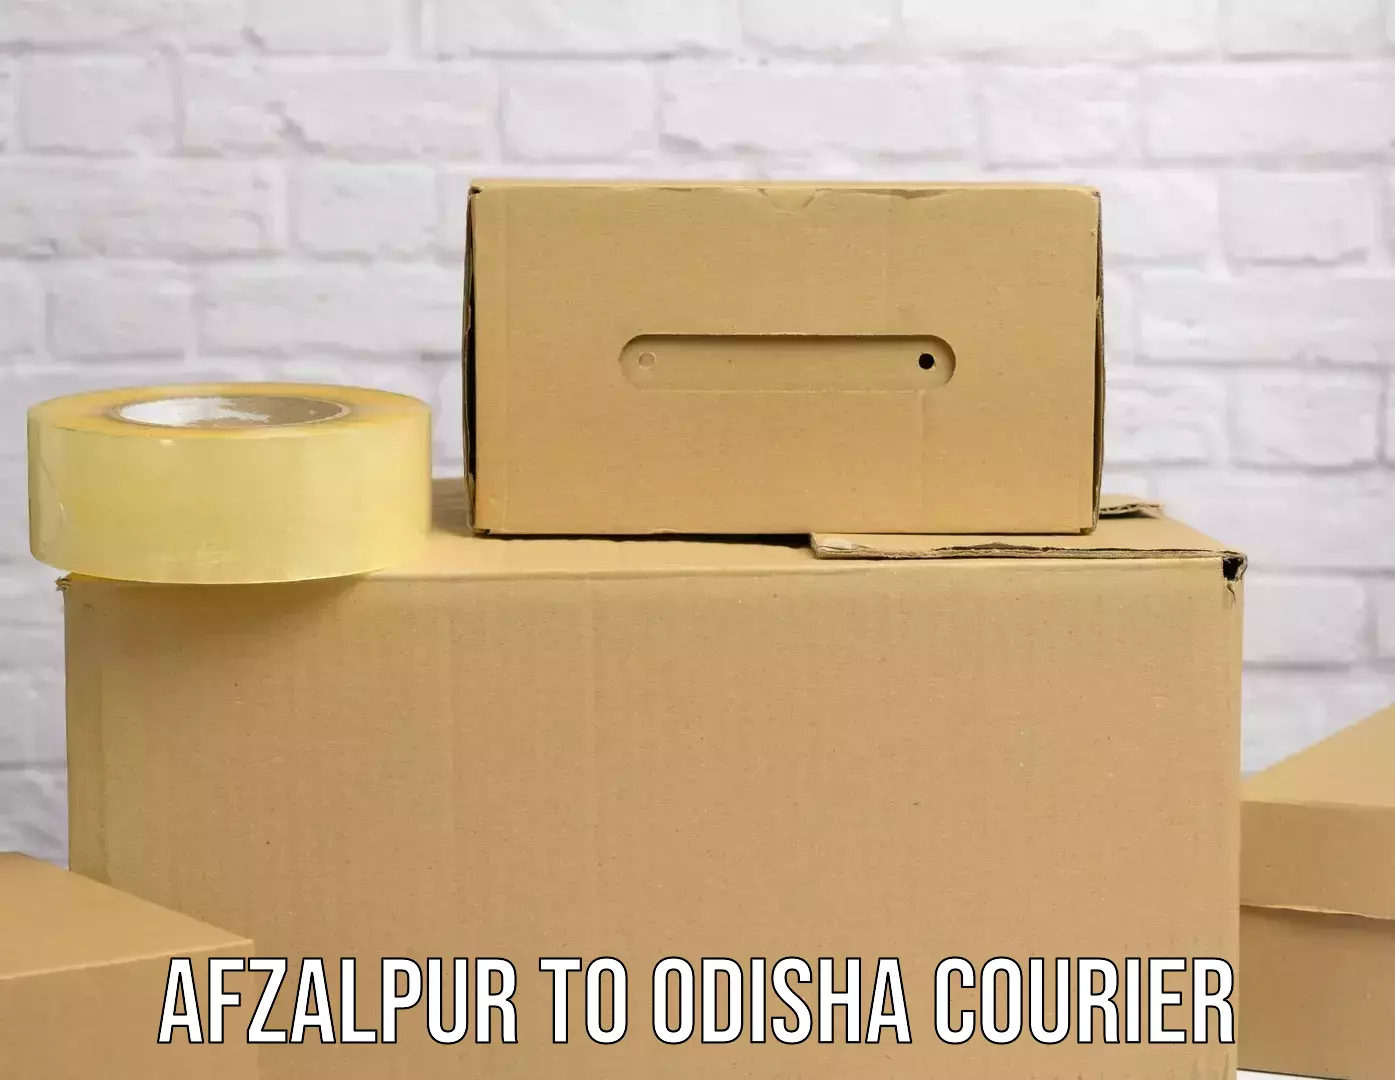 Efficient cargo services Afzalpur to Asika